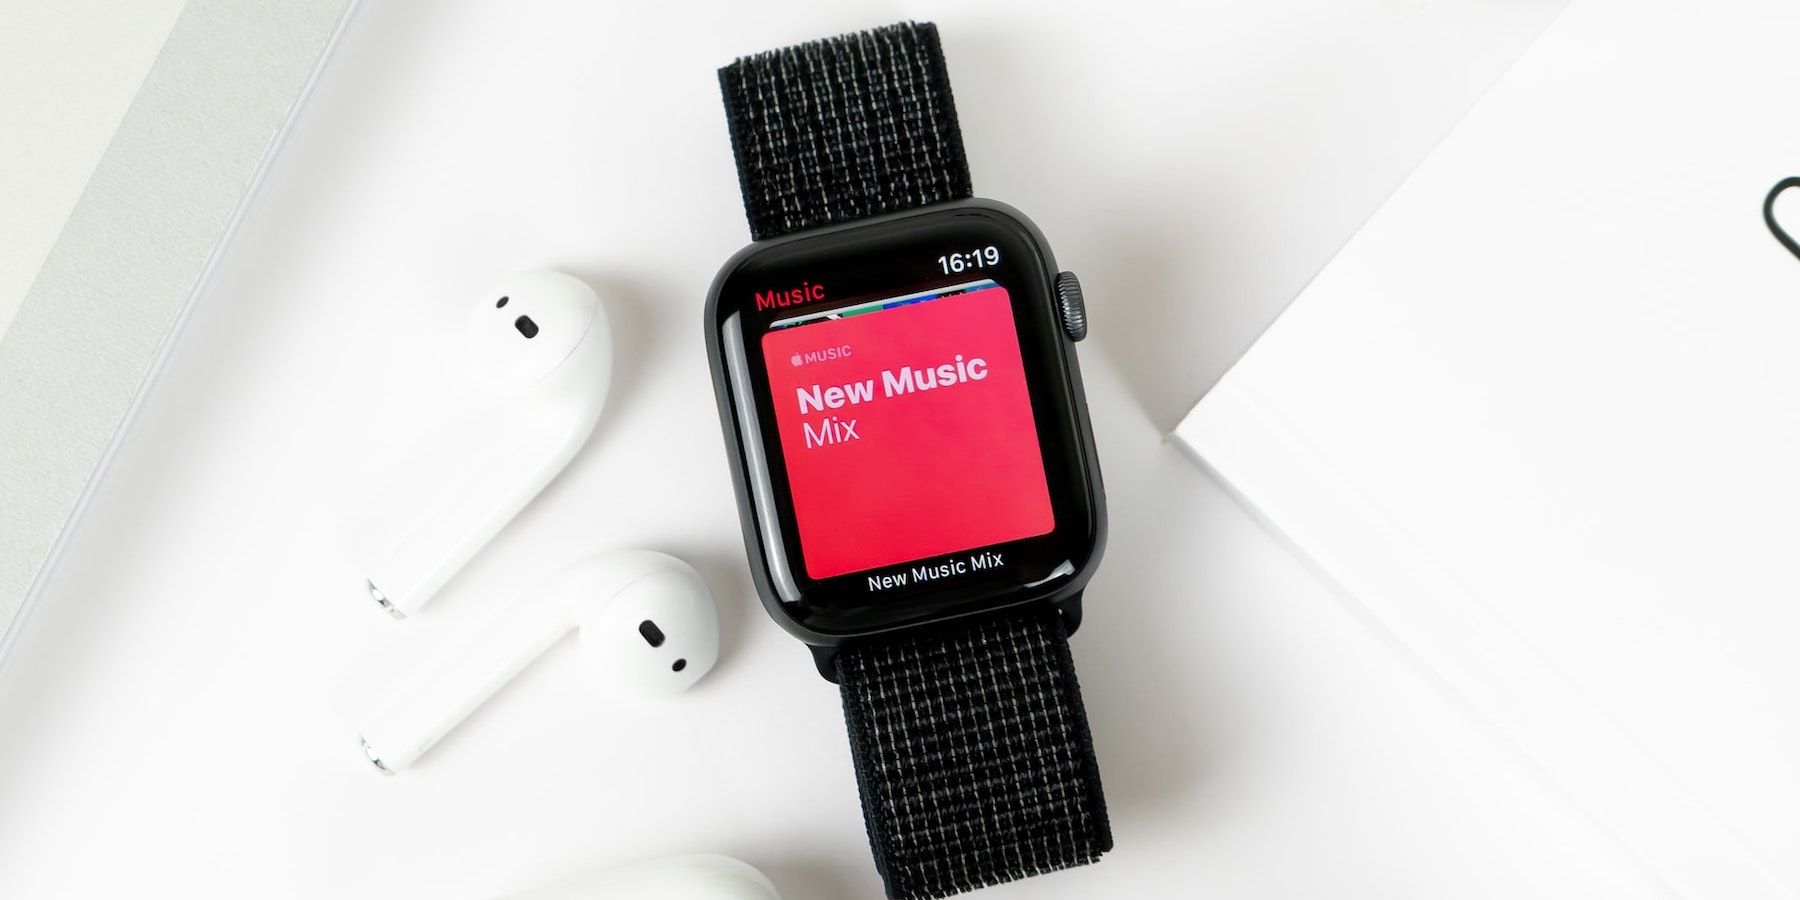 Apple Music playing on an Apple Watch, a pair of Airpods on the left